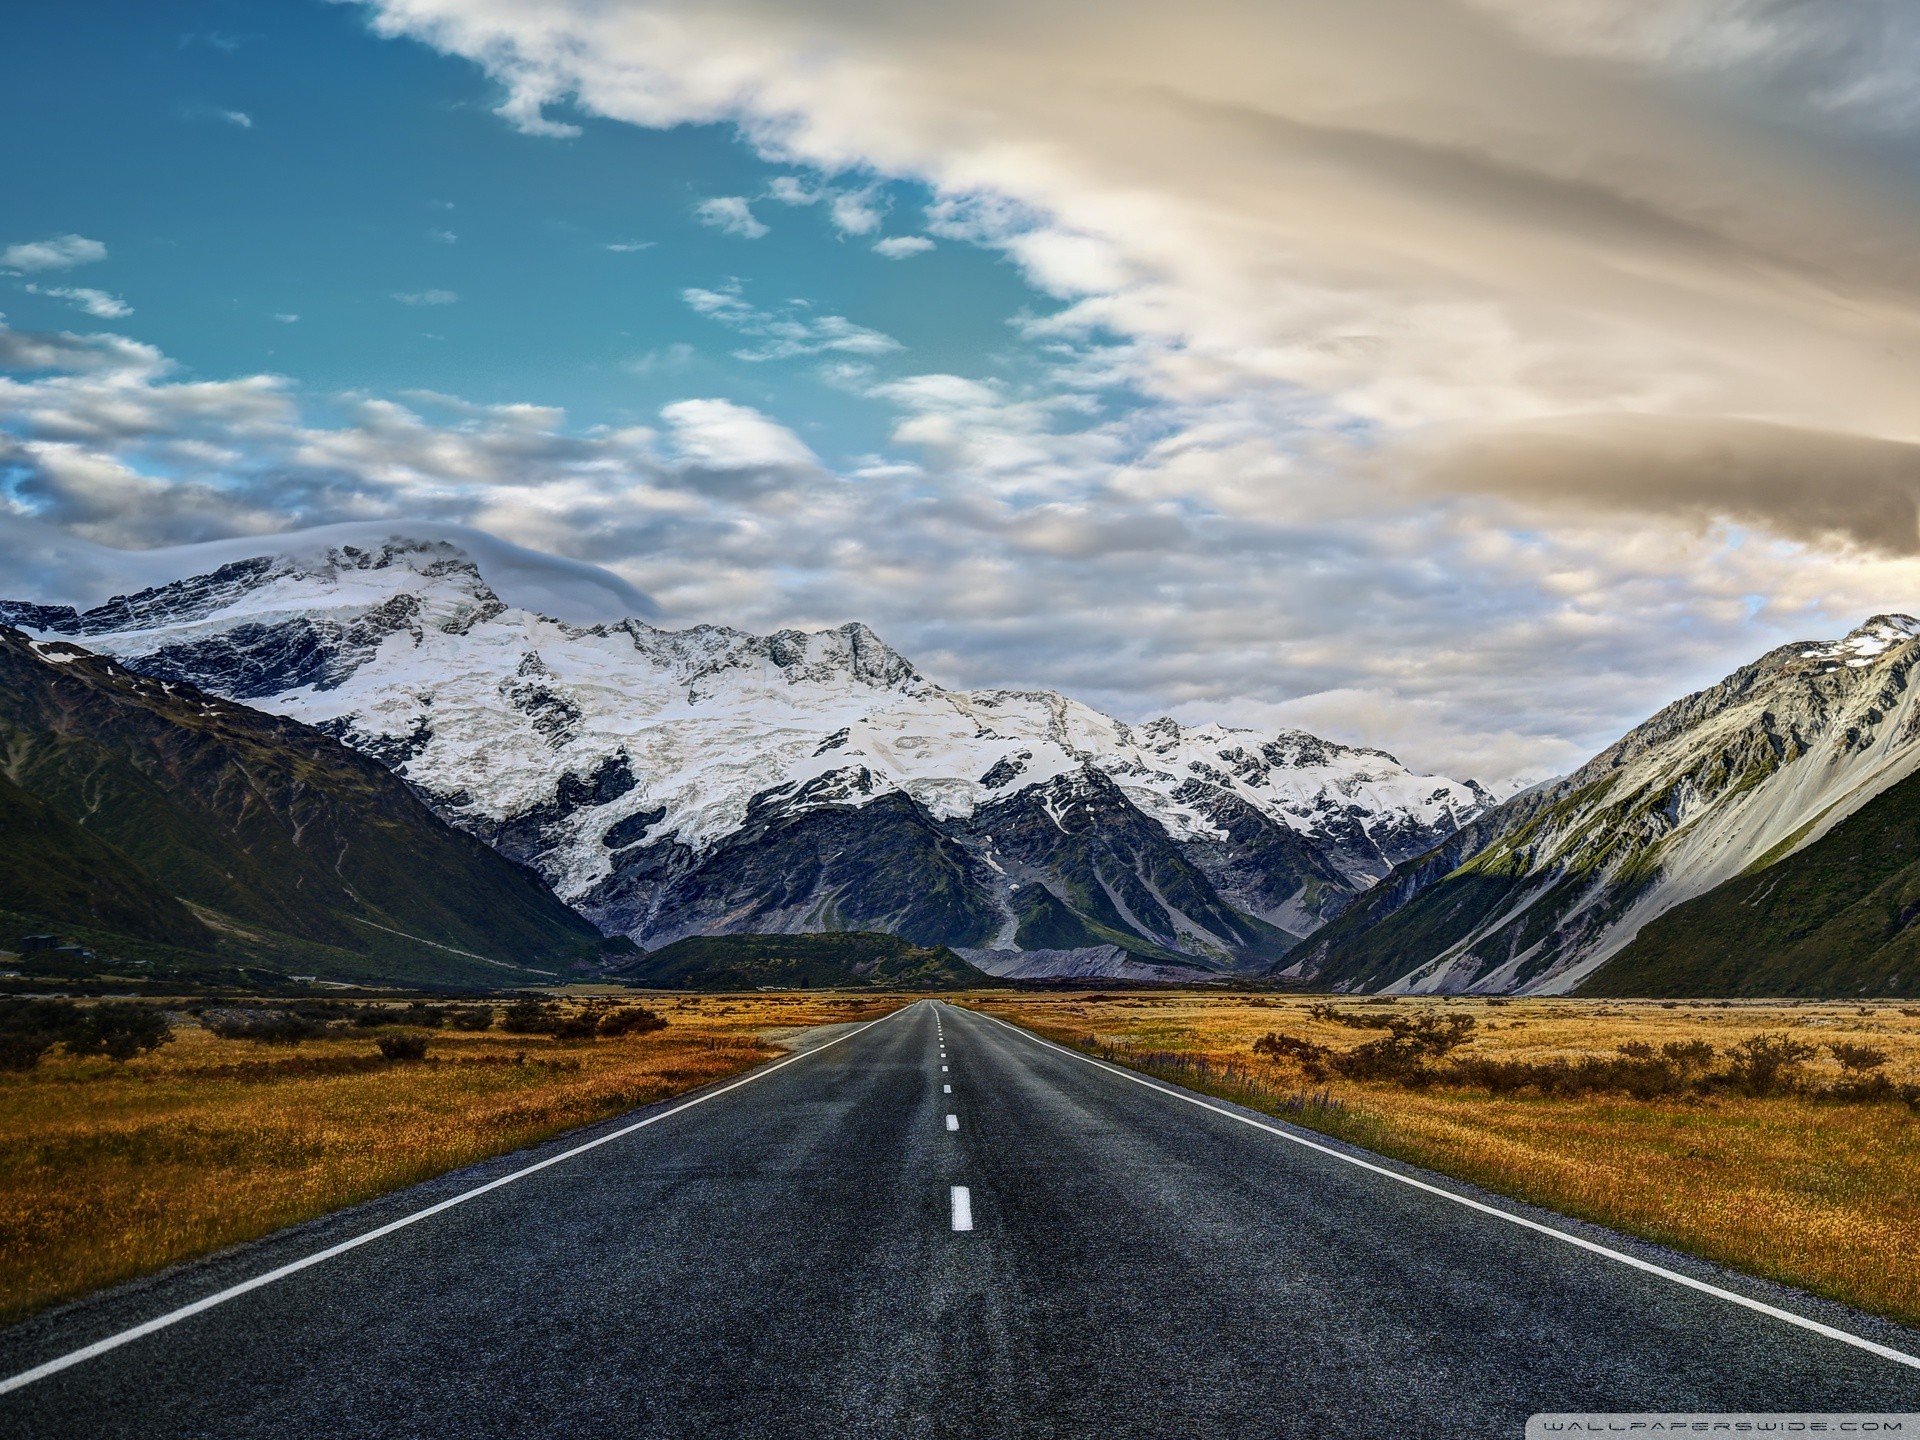 General 1920x1440 road mountains clouds nature Mount Cook New Zealand long road sky snowy peak landscape valley